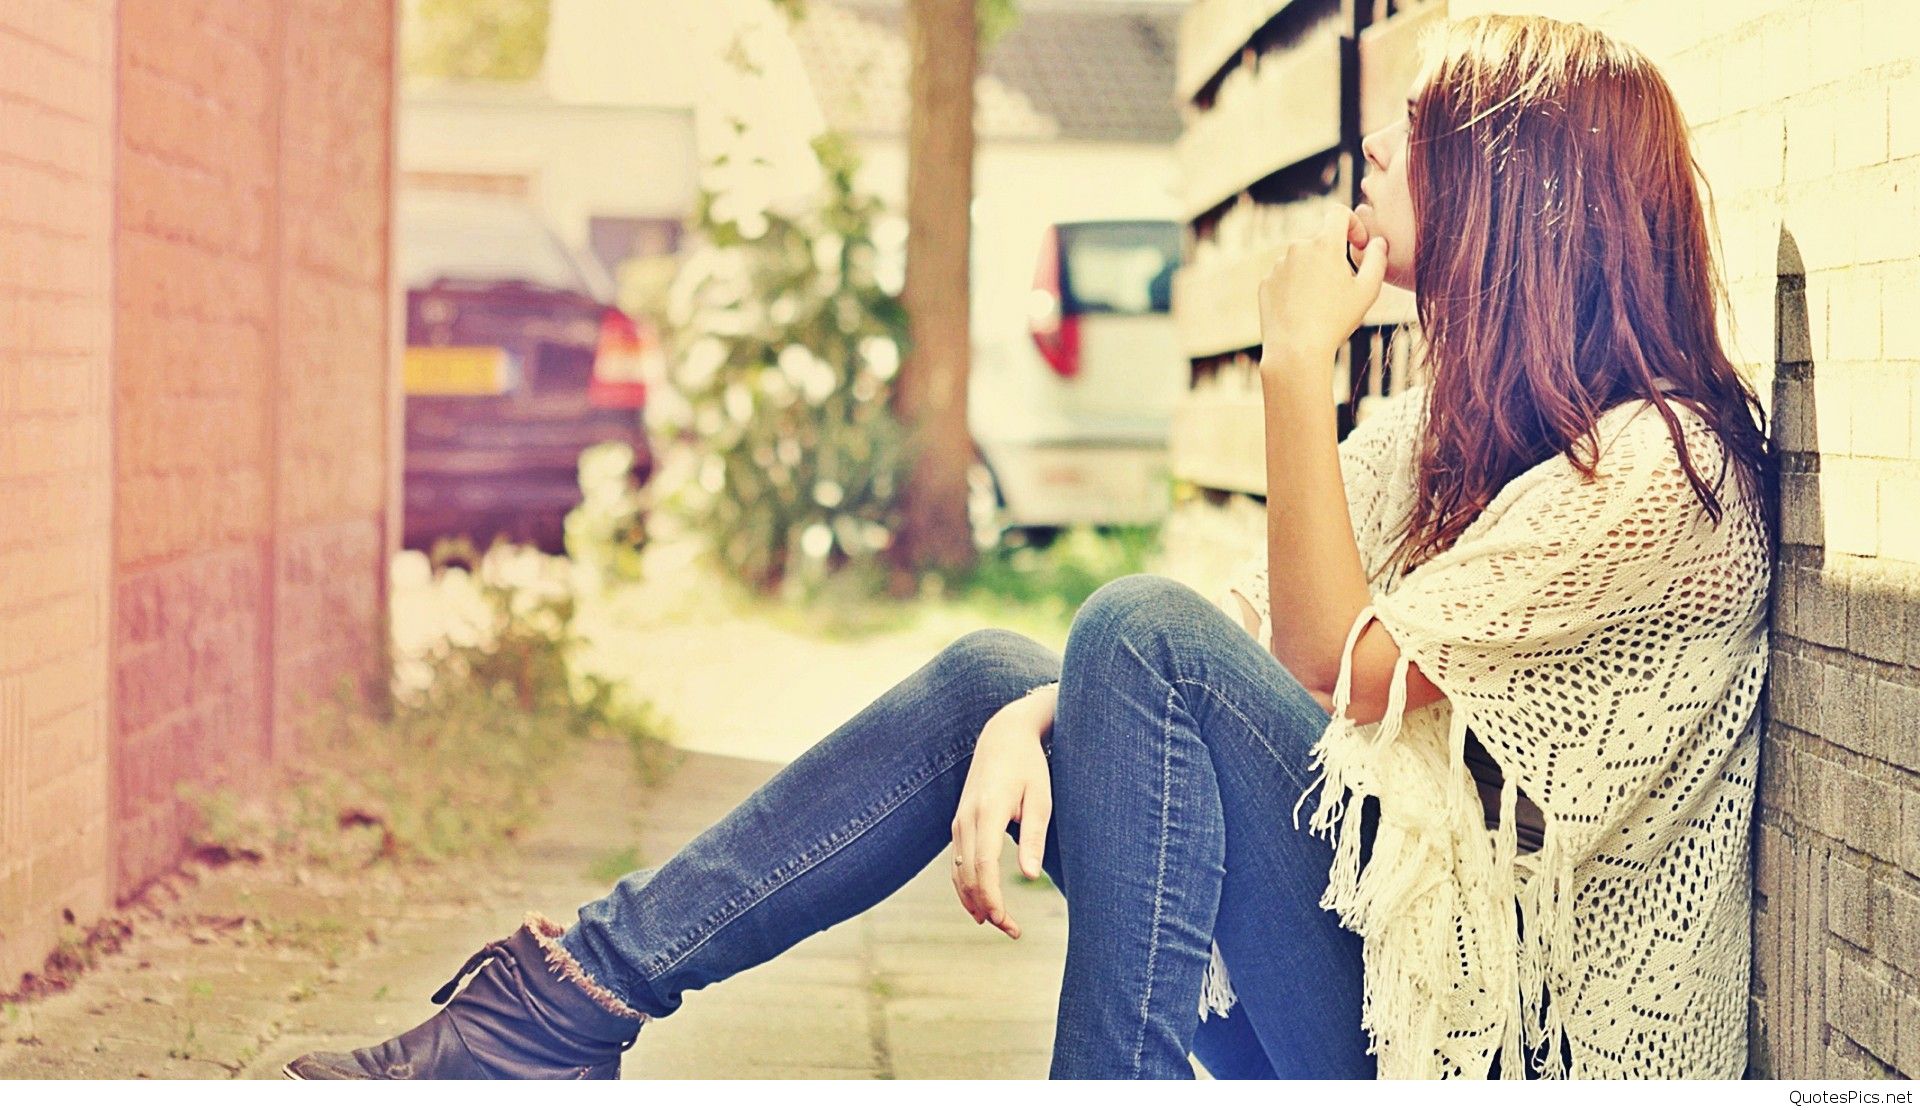 alone girl wallpaper,hair,photograph,jeans,beauty,sitting